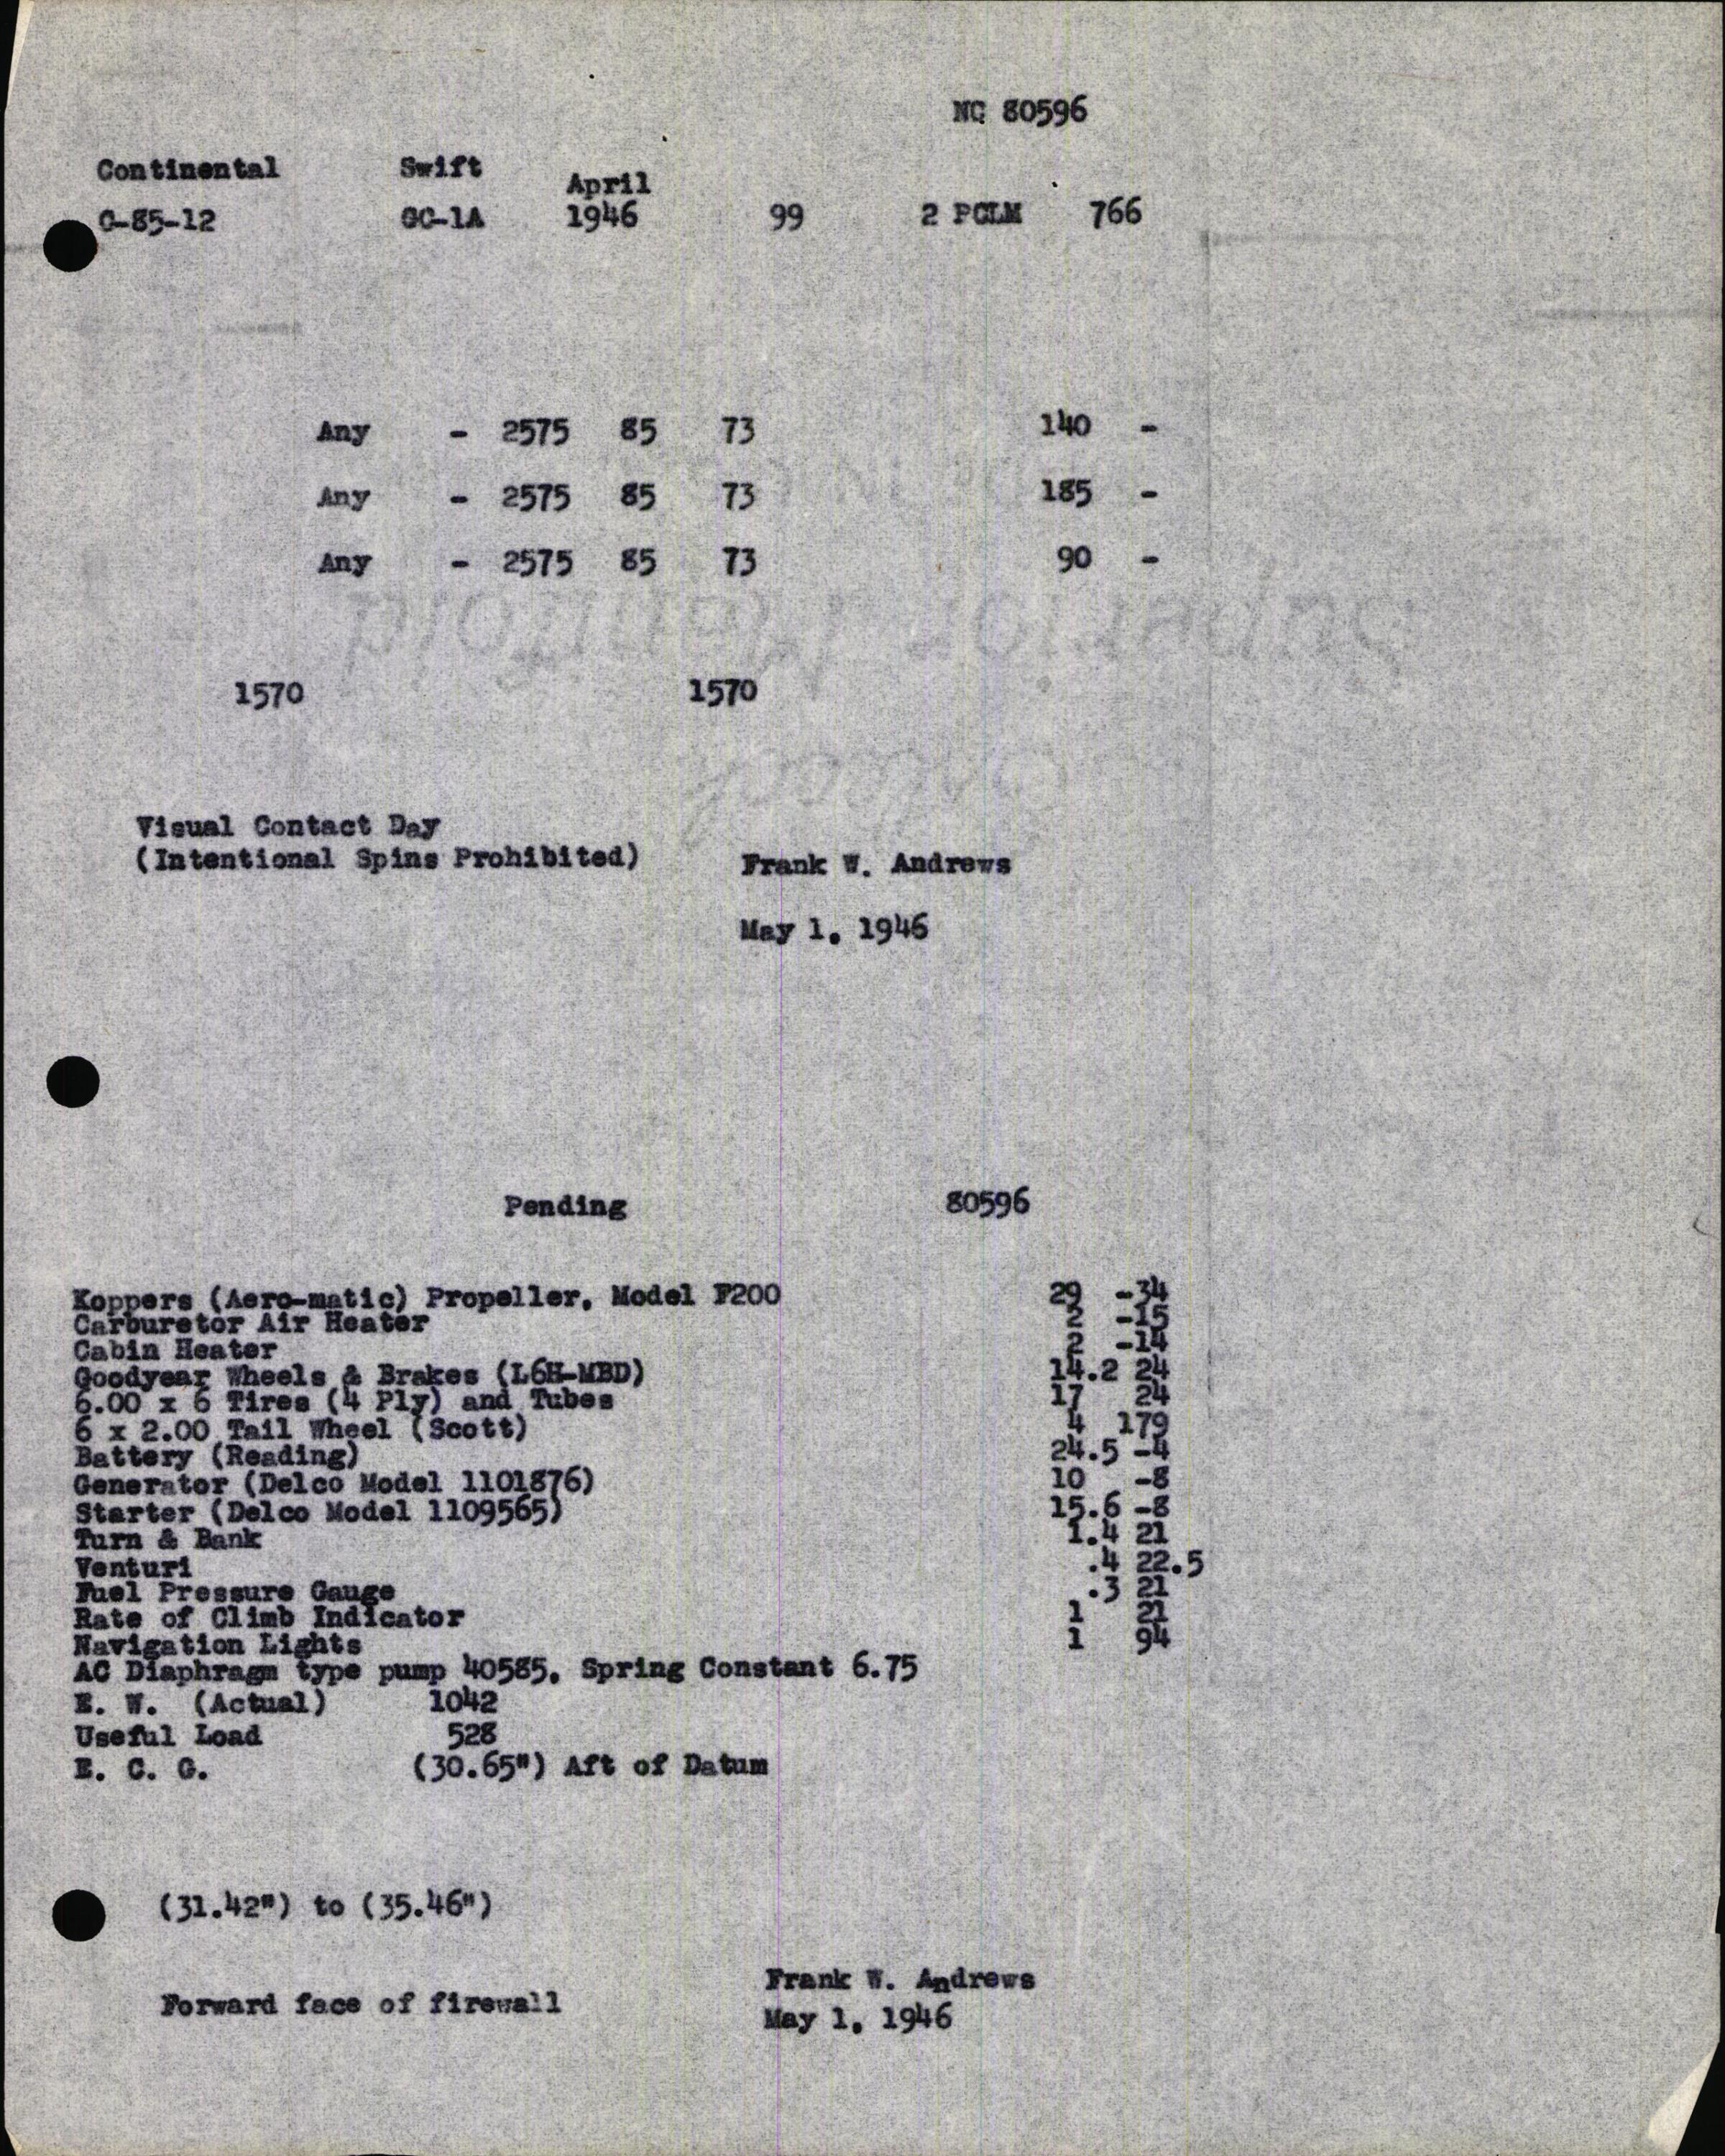 Sample page 9 from AirCorps Library document: Technical Information for Serial Number 99